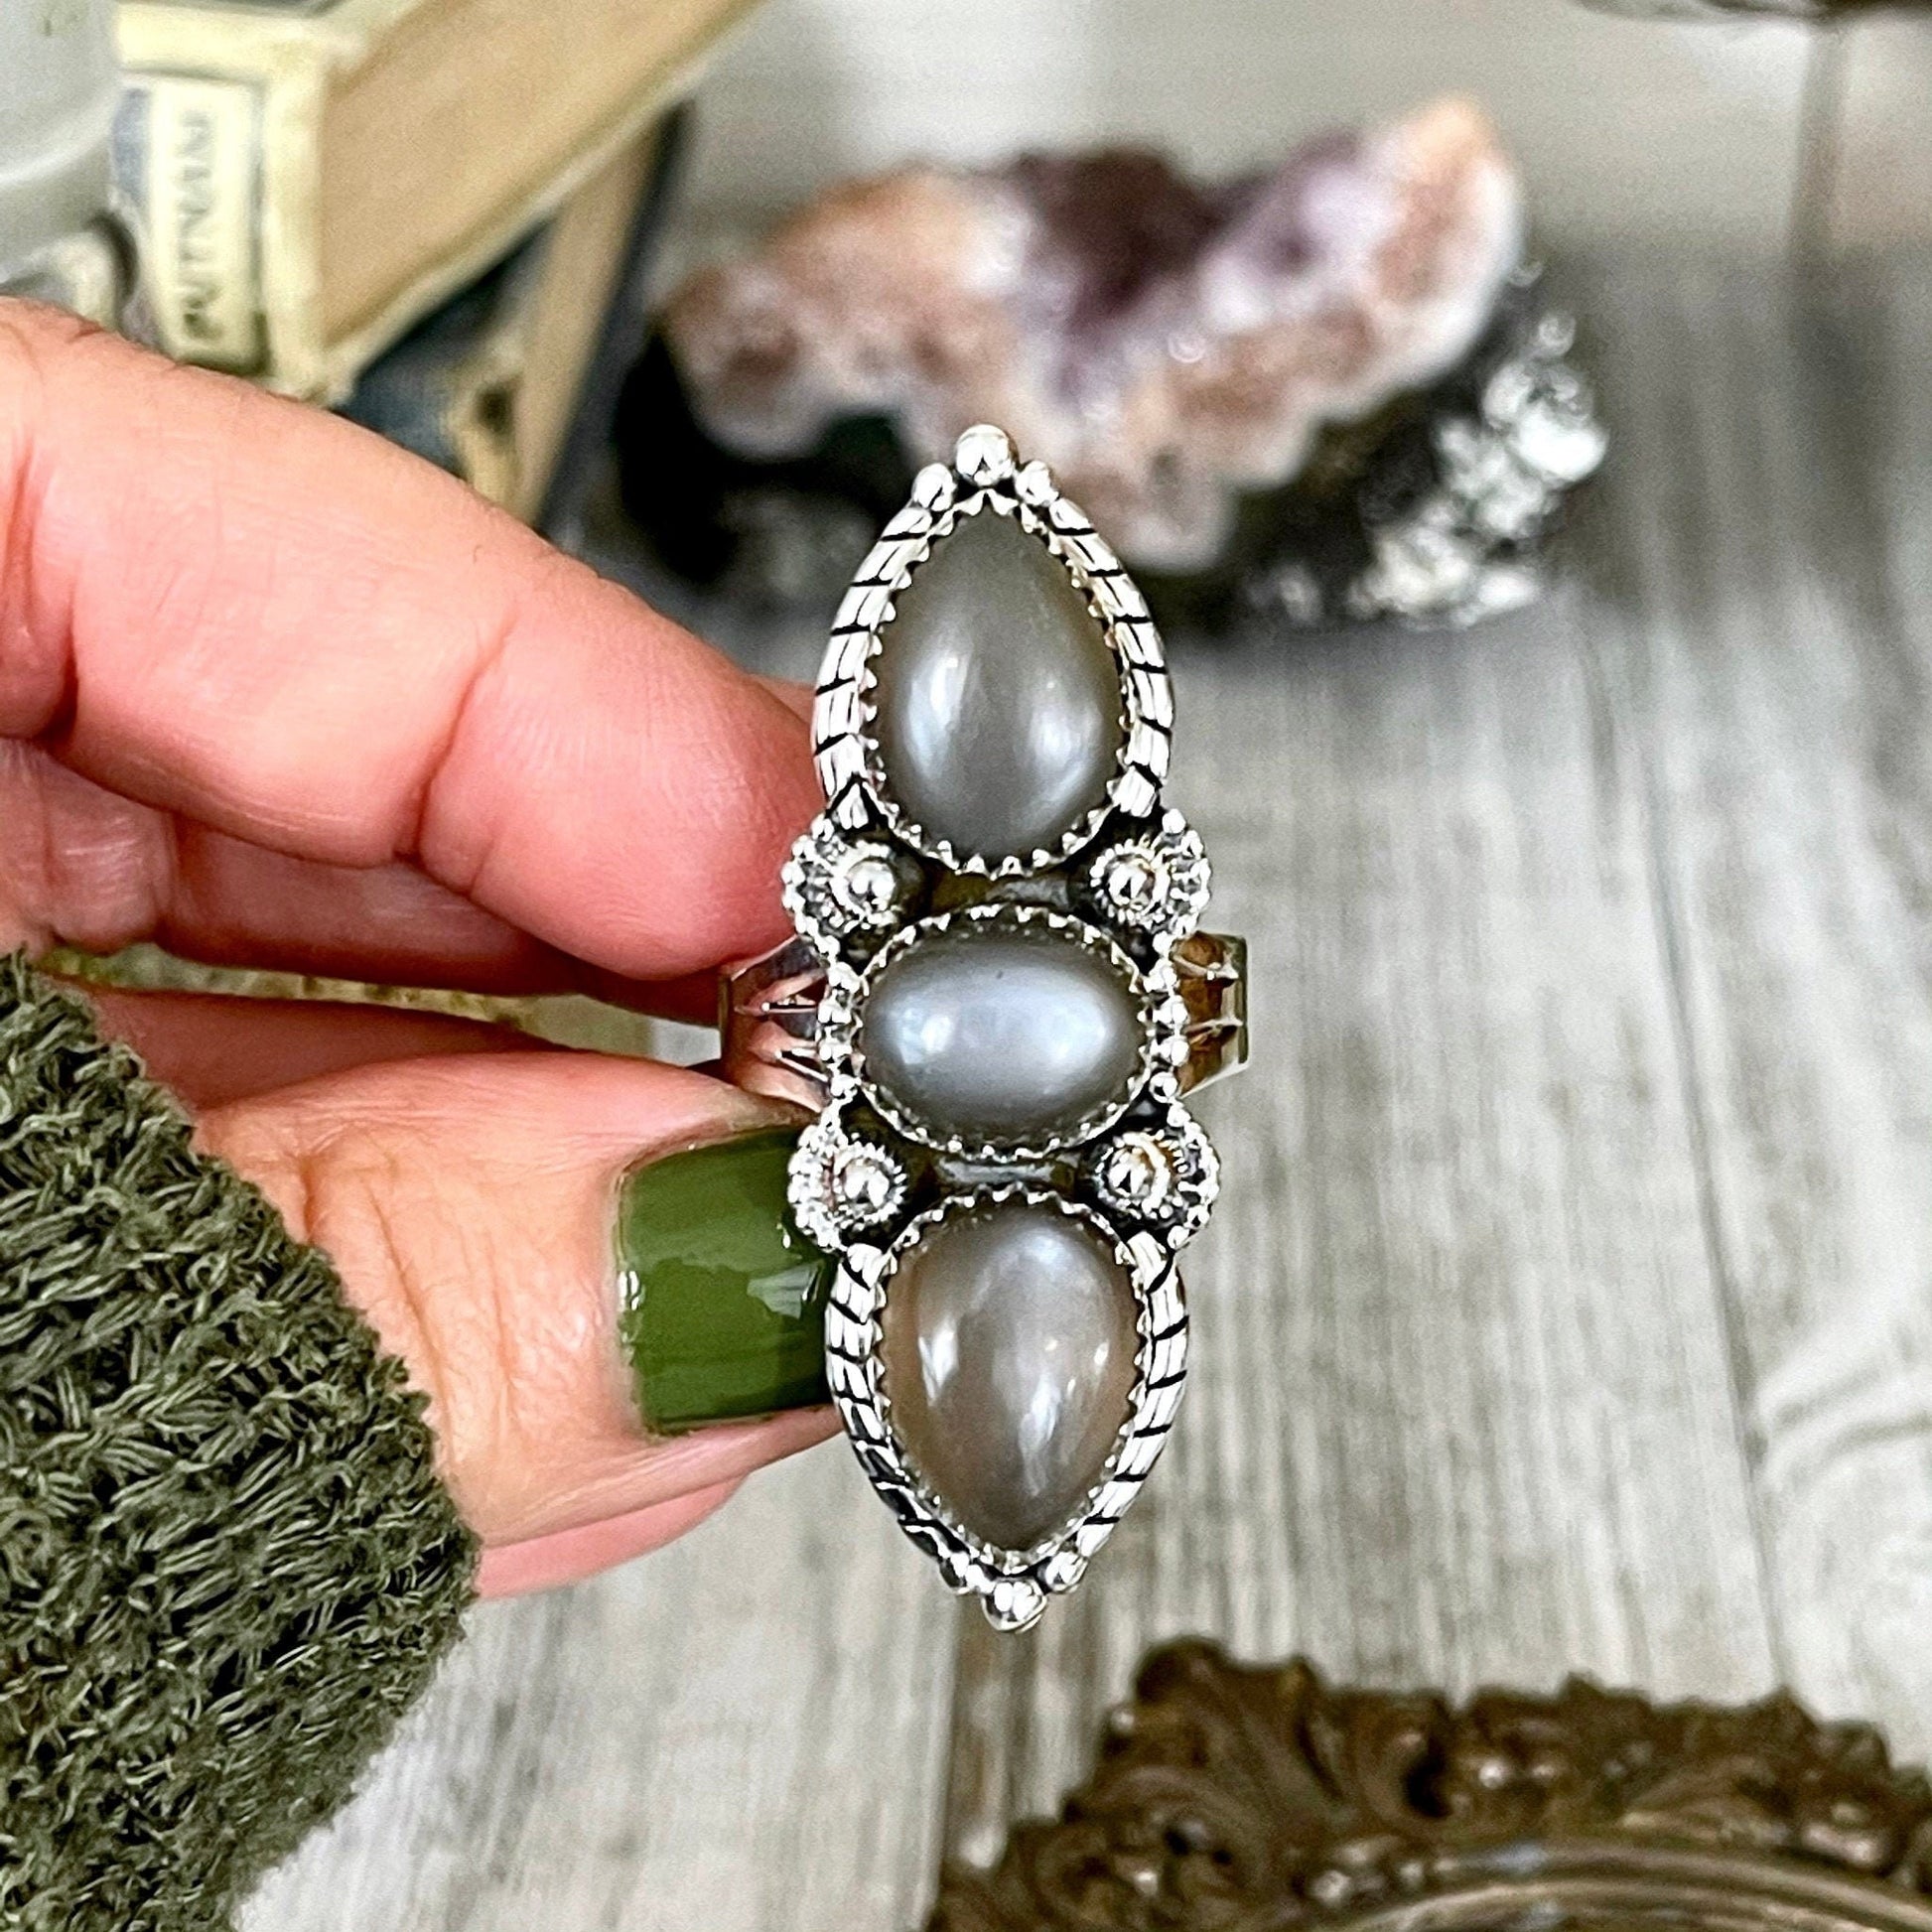 3 Stone Ring, Big Stone Ring, Bohemian Ring, Boho Jewelry, Boho Ring, Crystal Ring, Etsy Id 1064530524, Etsy ID: 1593862008, Foxlark Alchemy, Foxlark- Rings, Gift For Woman, Grey Moonstone, Gypsy Ring, Jewelry, Rings, Statement Rings, Wholesale